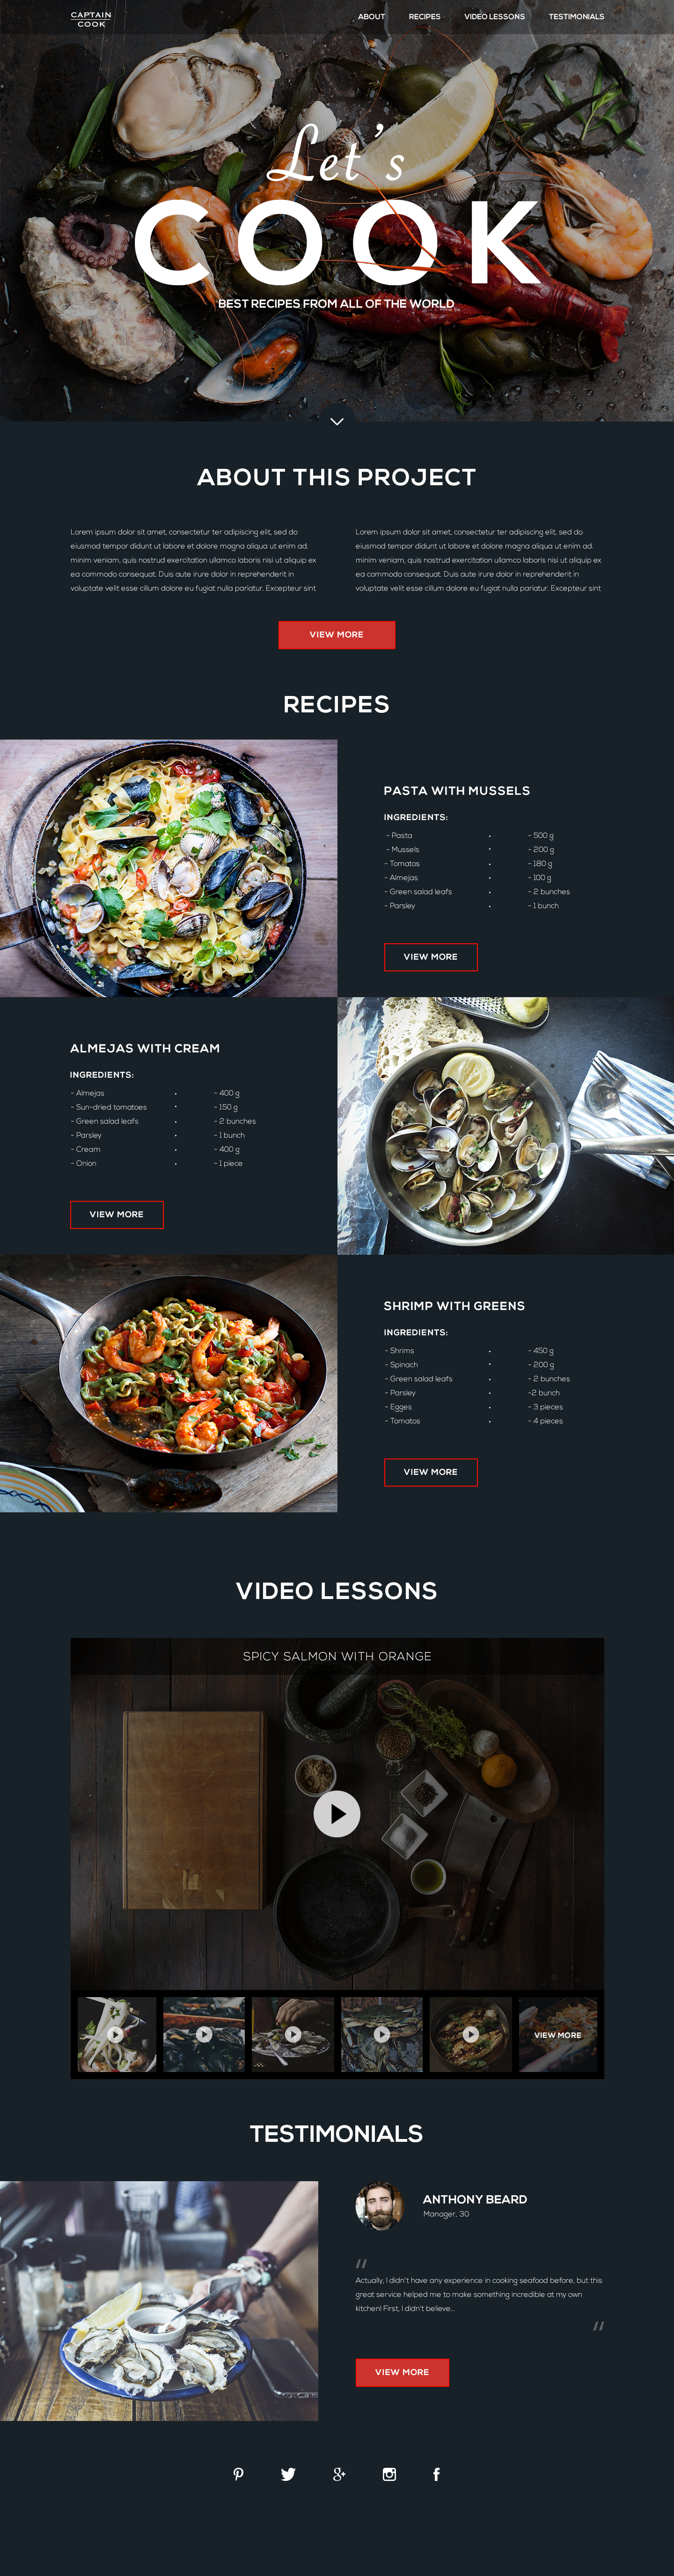 Recipes_cooking